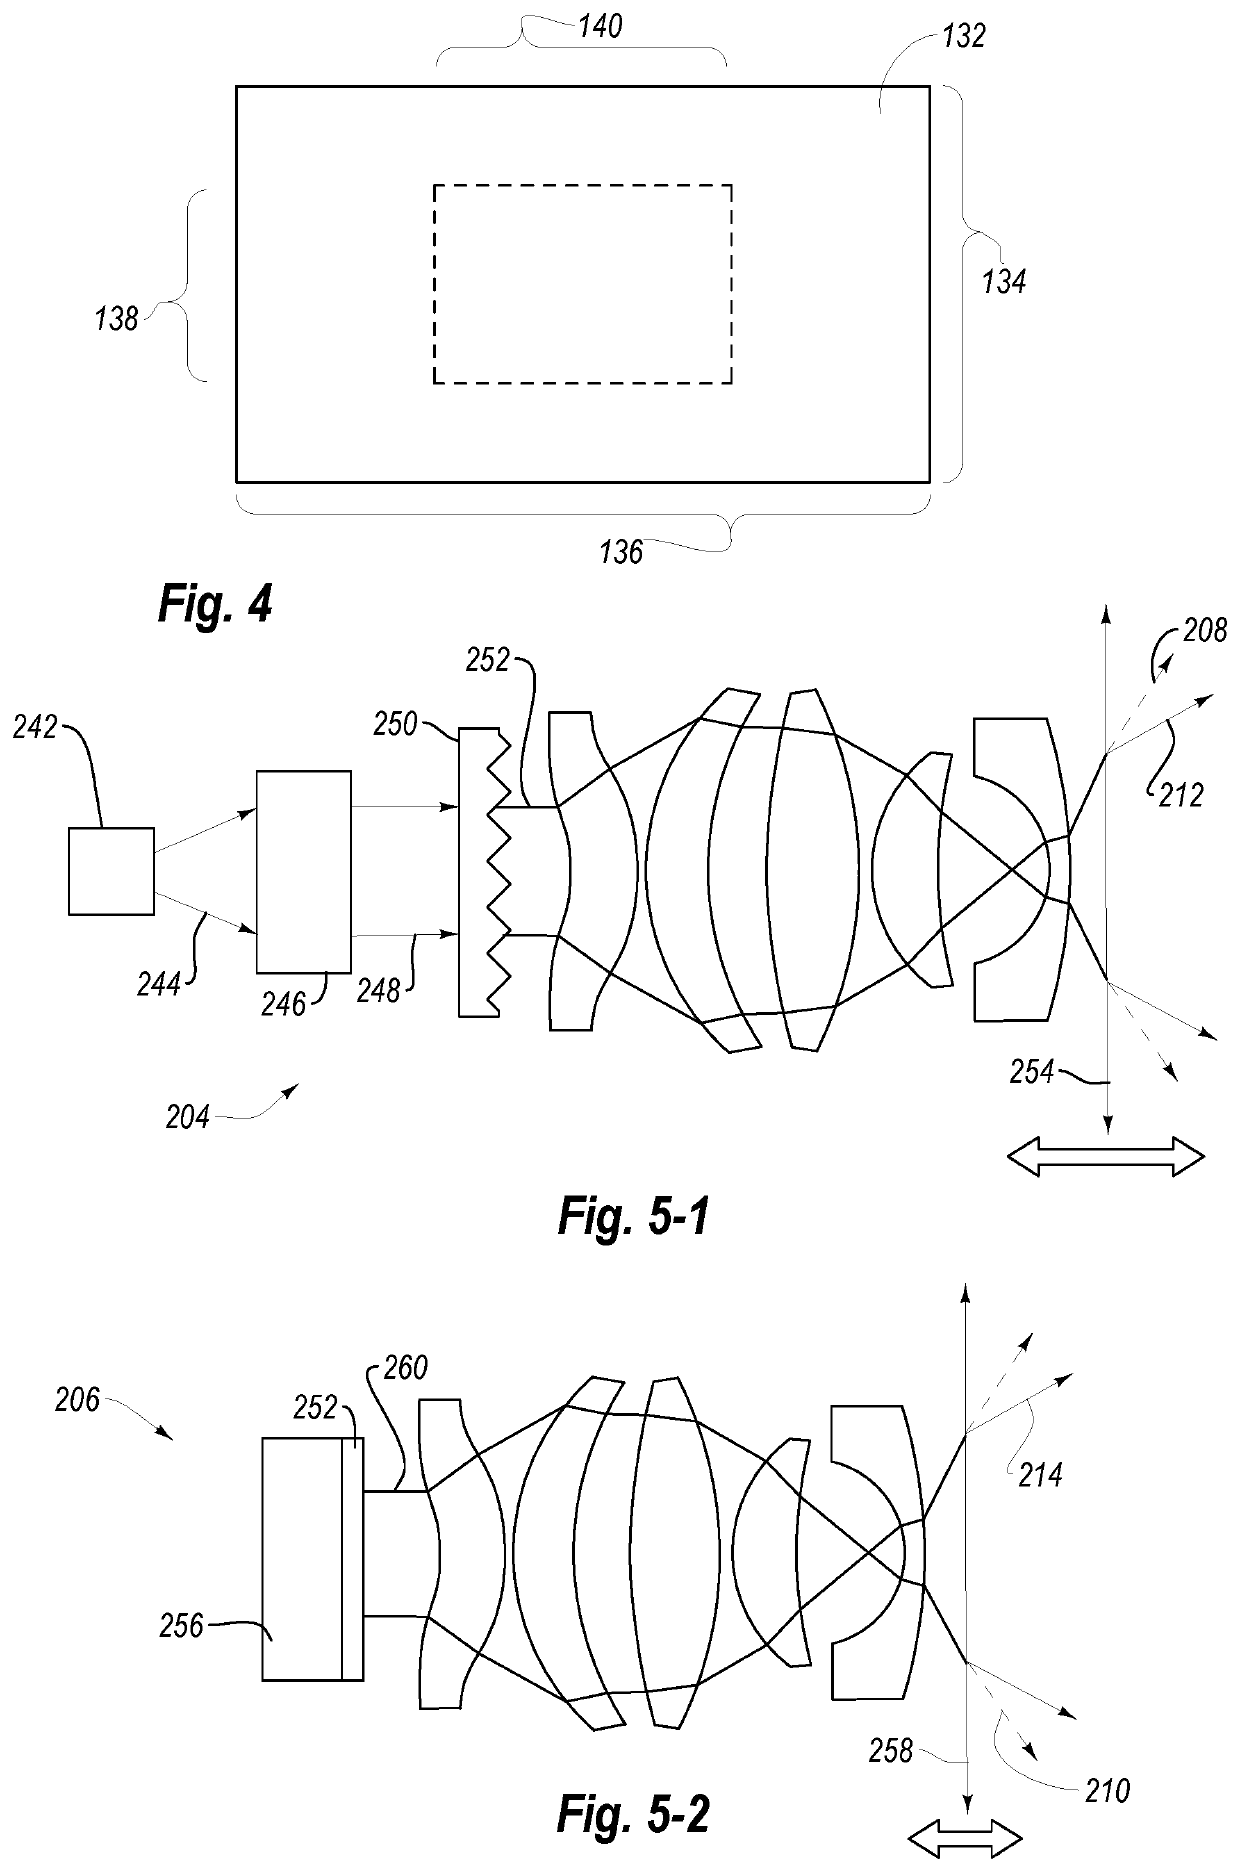 Passive and active stereo vision 3D sensors with variable focal length lenses